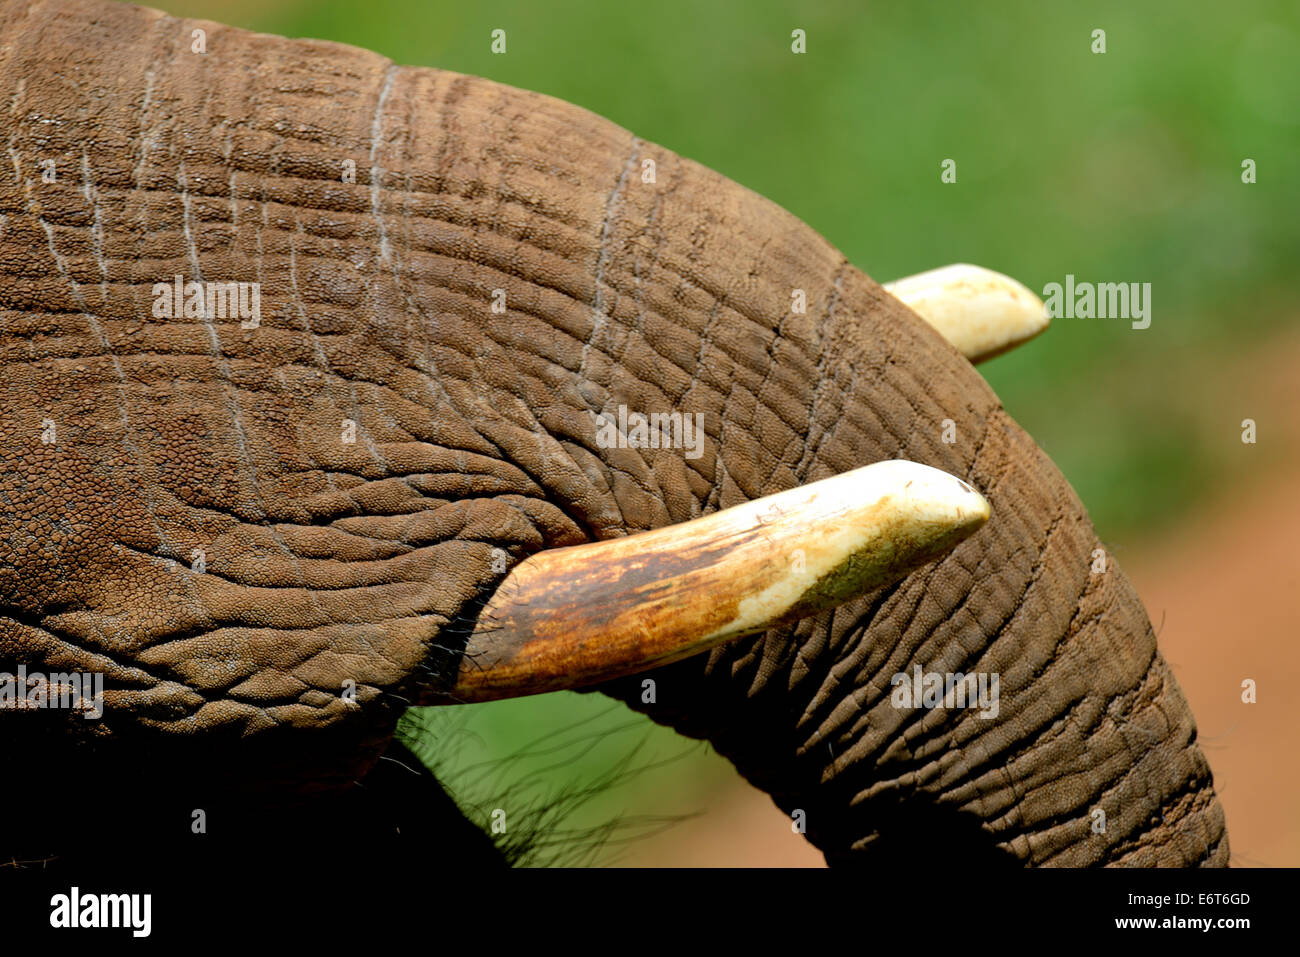 Elephant detail in the Natural Park of Cabarceno, Cantabria, Spain, Europe Stock Photo